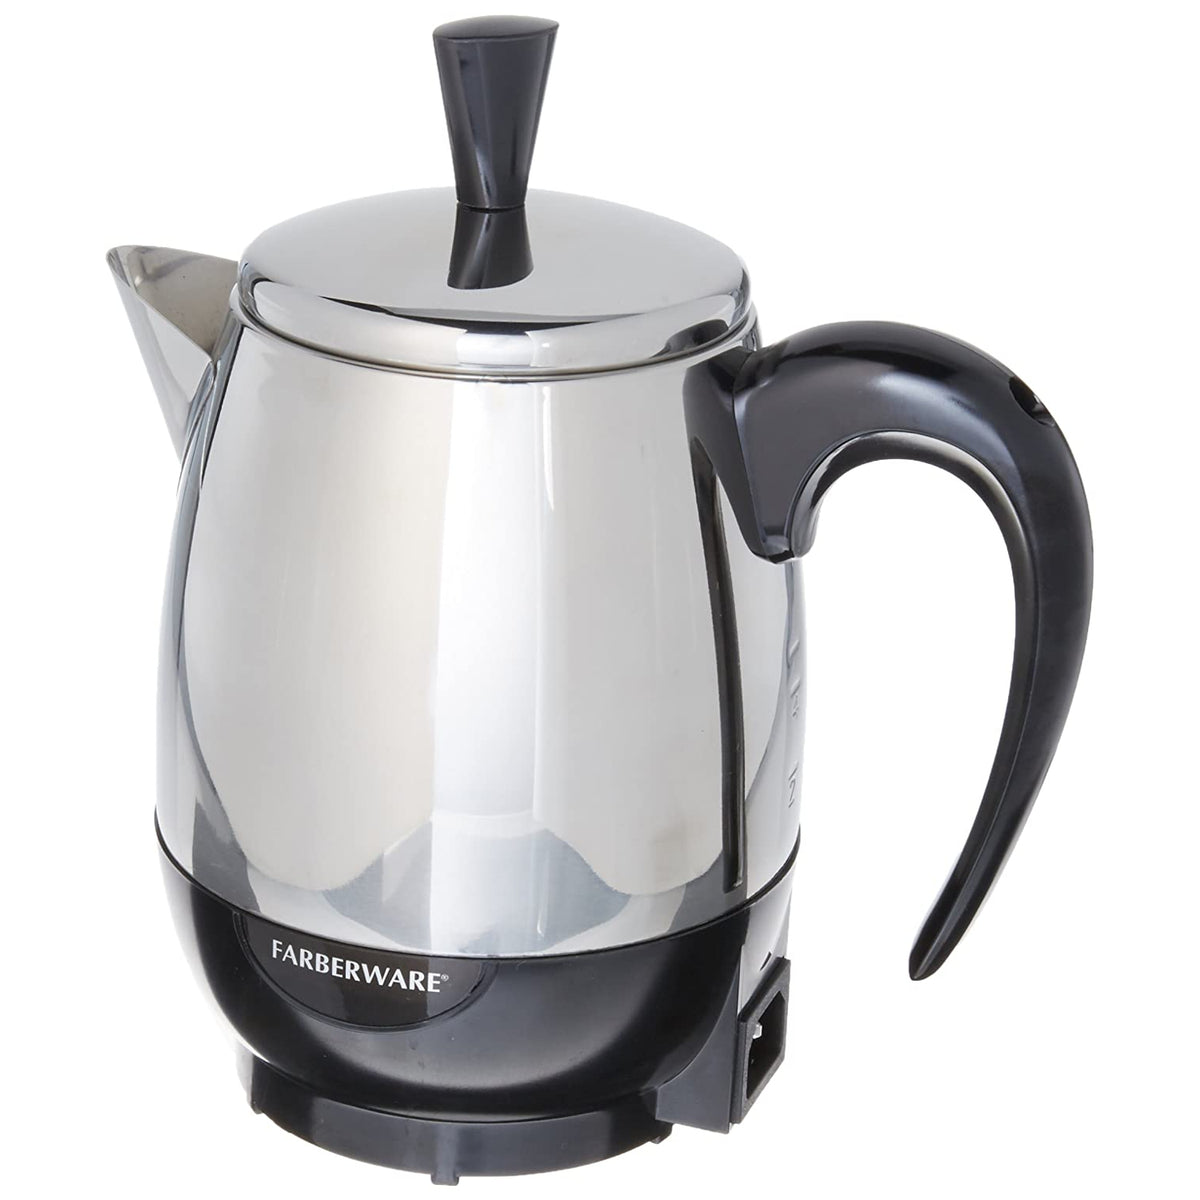 Farberware FCP240 Stainless Steel Percolator, 2 To 4 Cup, 1000